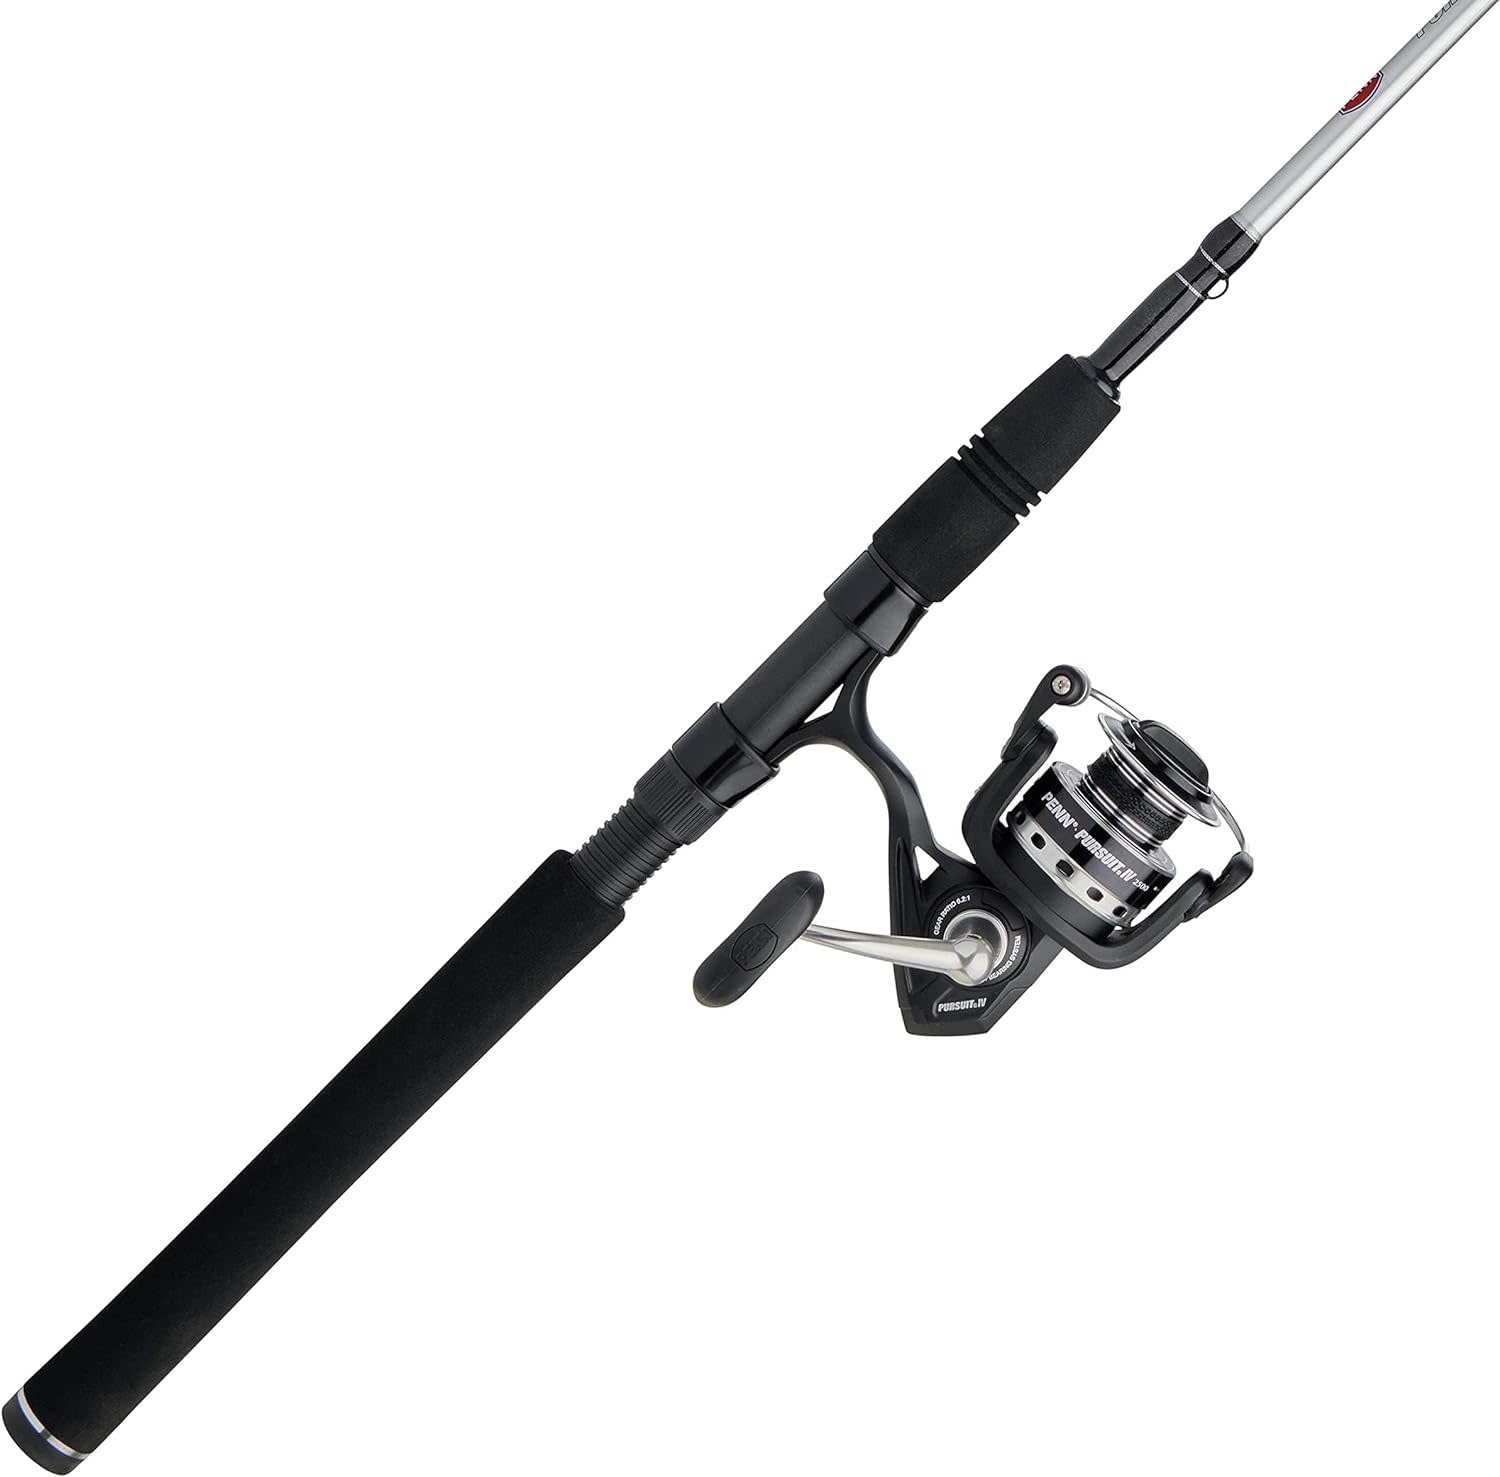 PENN 7' Pursuit IV 2-Piece Fishing Rod and Reel (Size 4000) Inshore  Spinning Combos, 7', 1 Graphite Composite Fishing Rod with 5 Reel, Durable  and Lightweight, Black/Silver - Amazing Bargains USA - Buffalo, NY